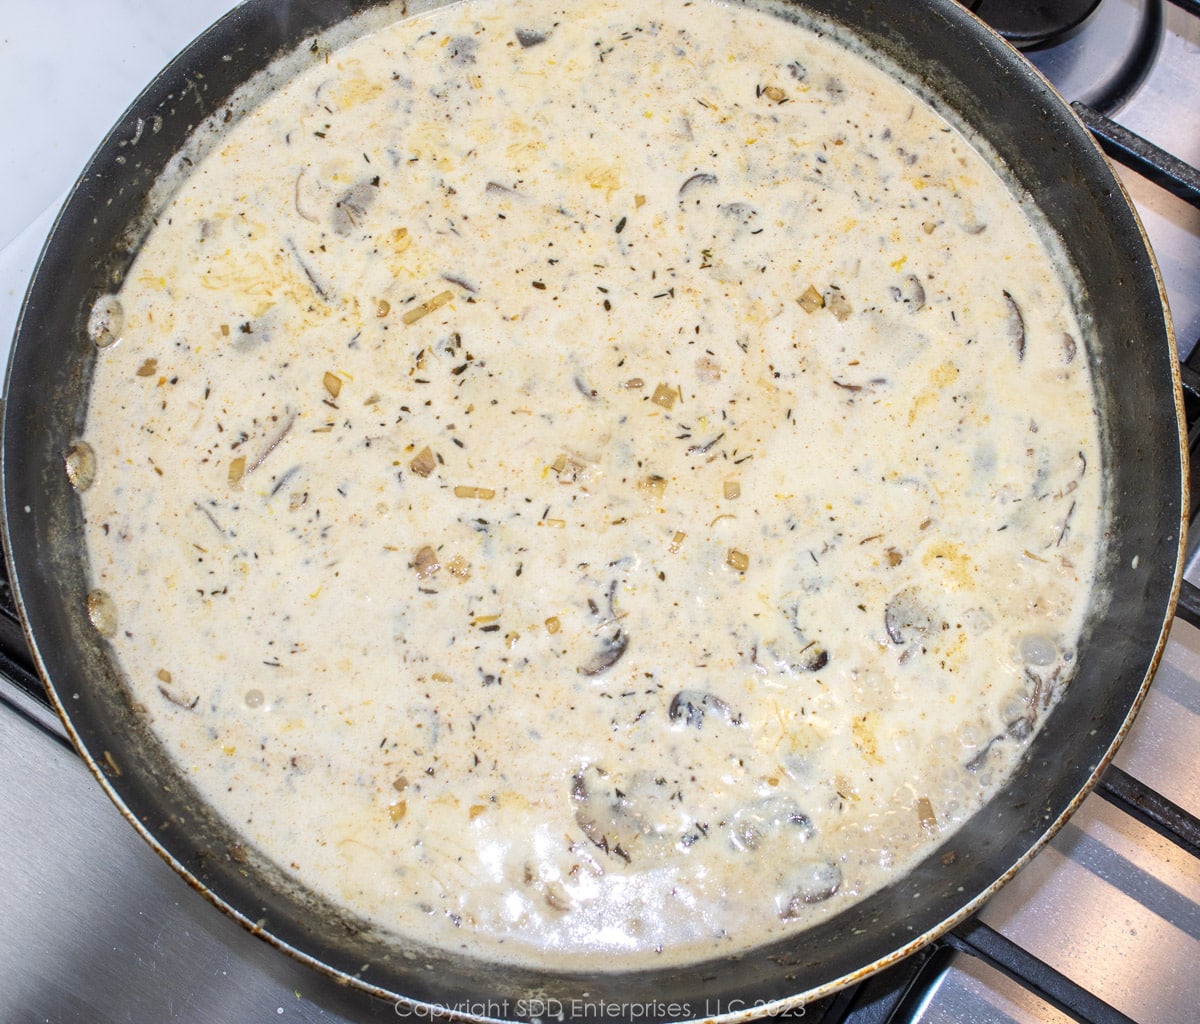 Cream sauce simmering in a skillet.